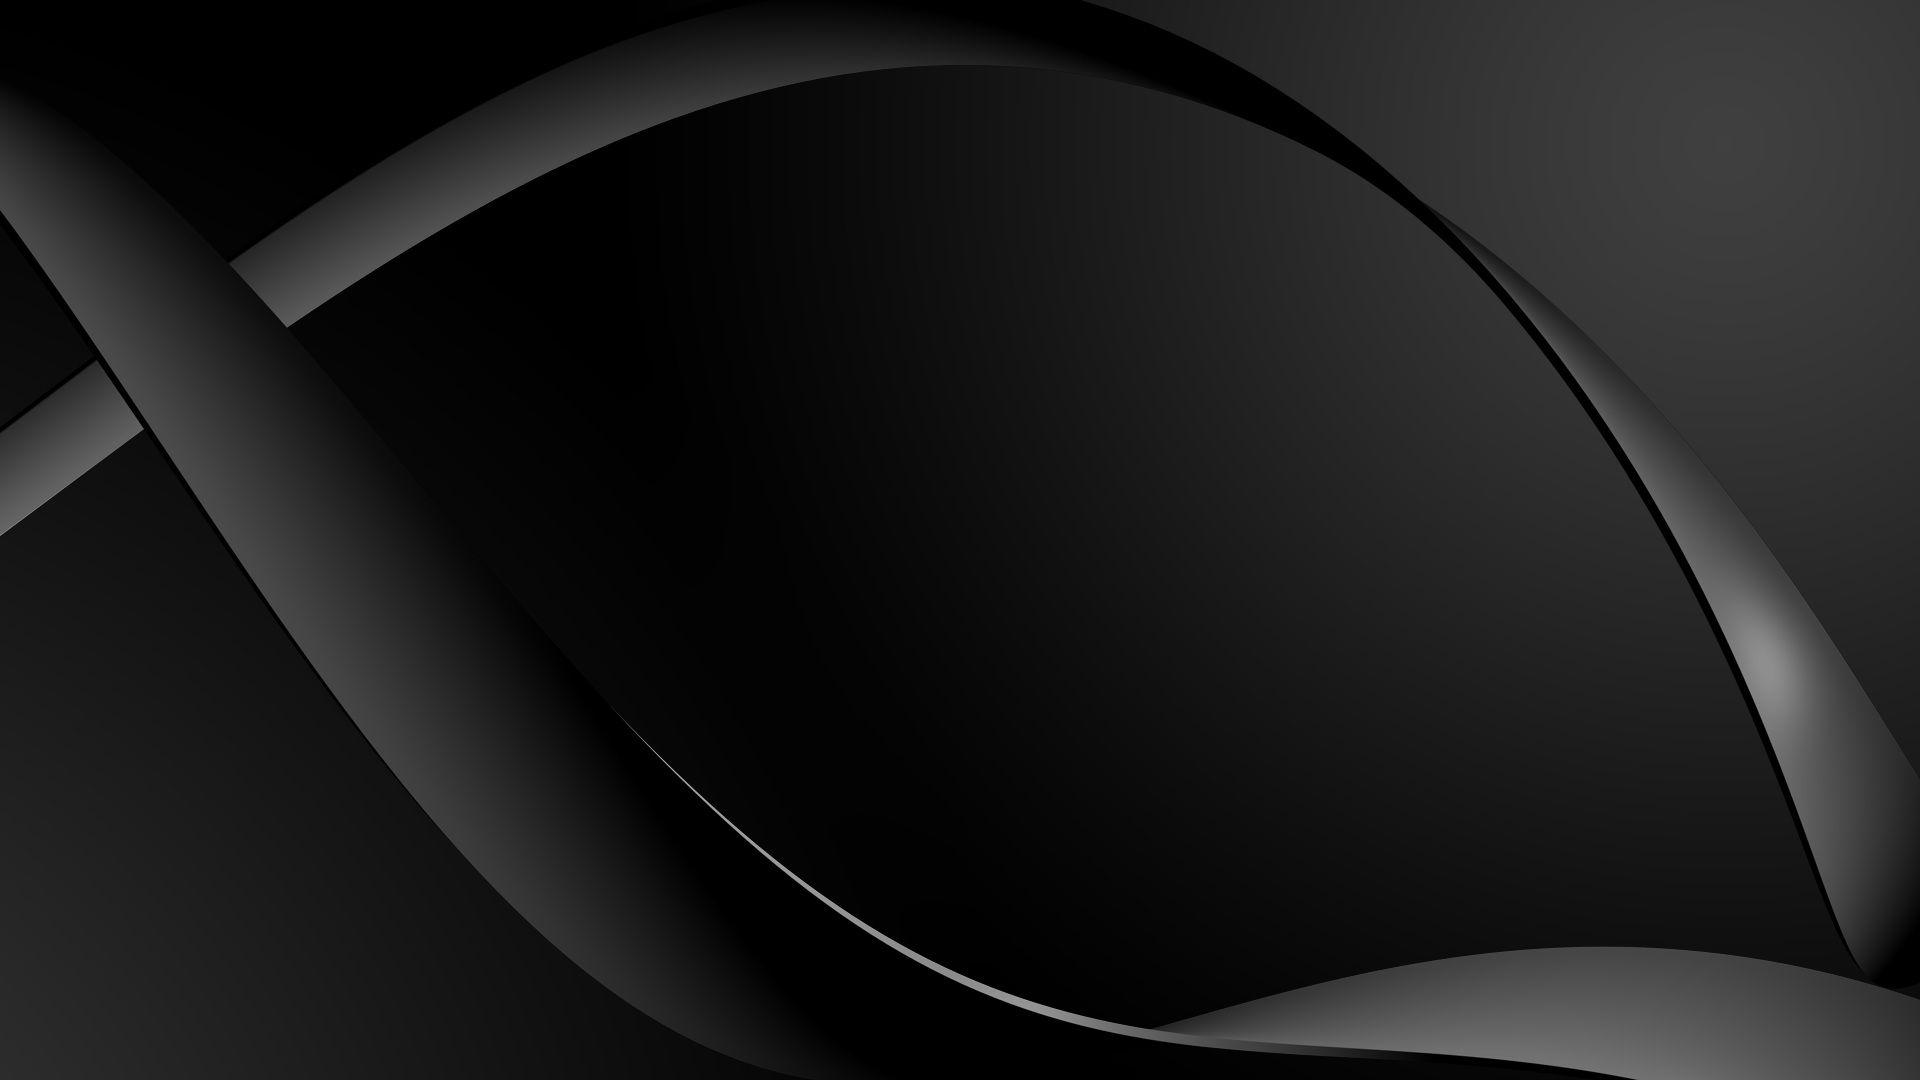 Abstract Black Background 1 HD Wallpaper. lzamgs